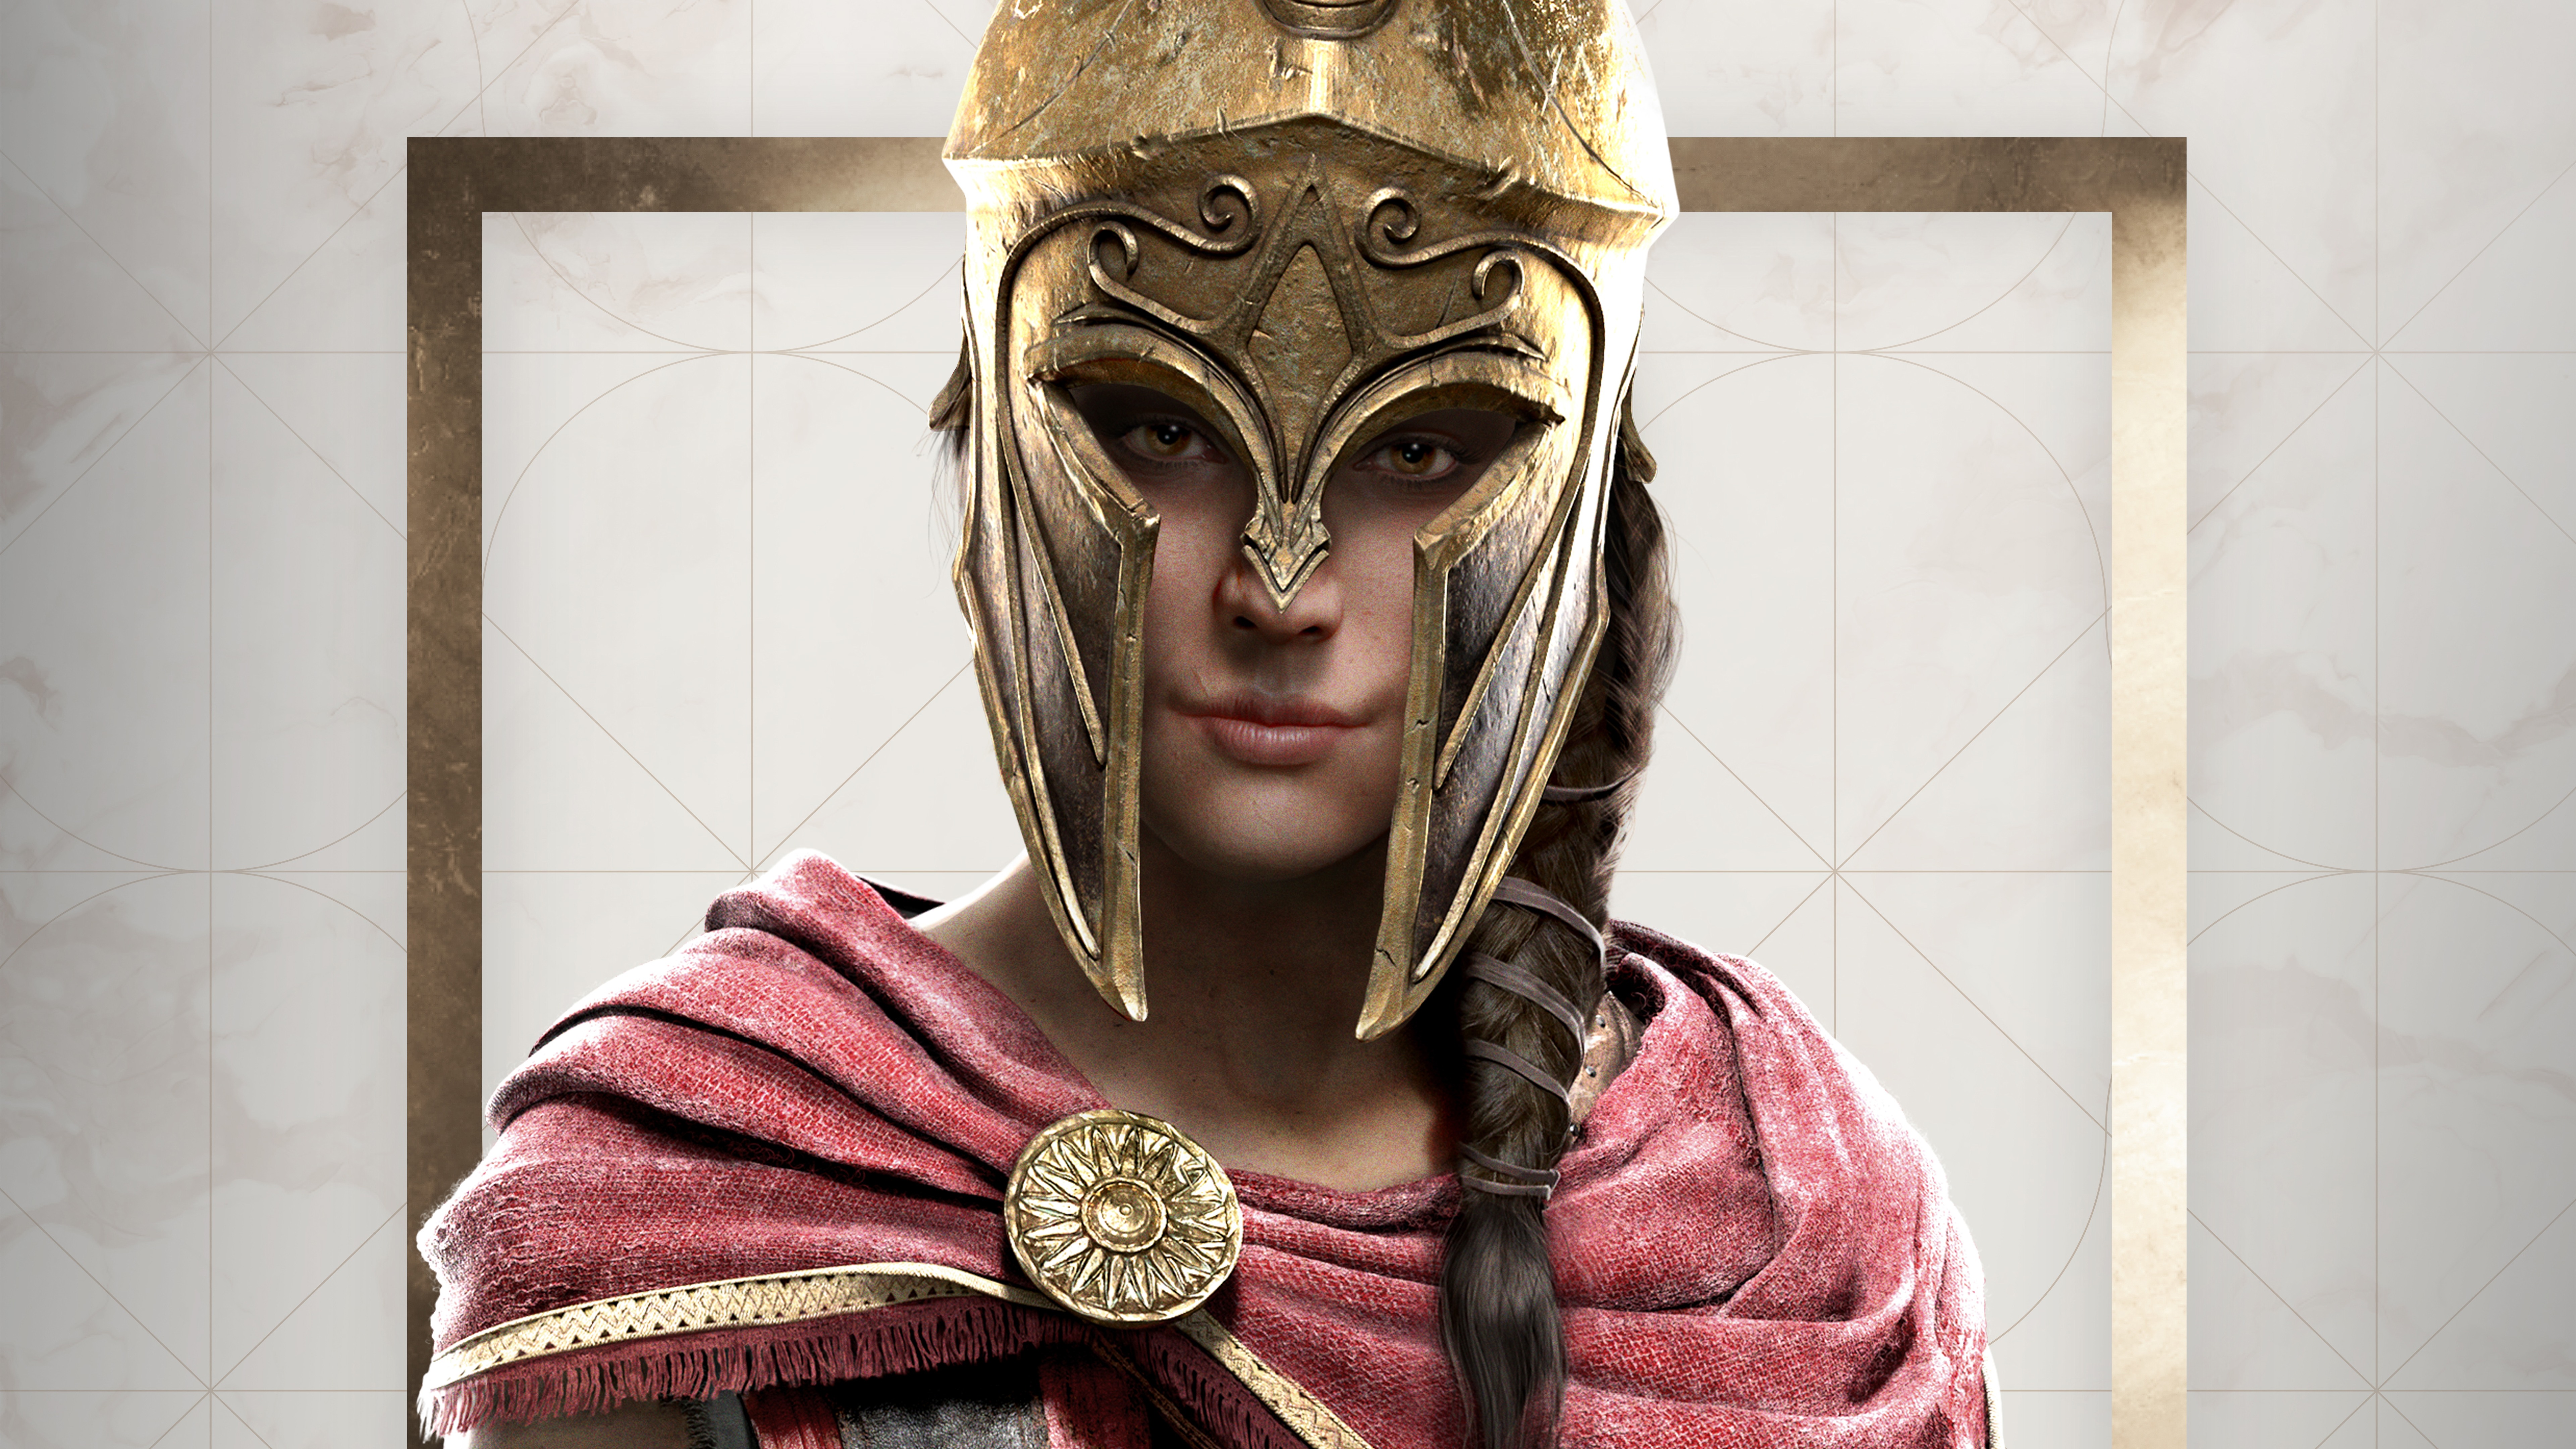 General 7680x4320 blue background Assassin's Creed Assassin's Creed Odyssey Assassins Creed: Odyssey Kassandra warrior helmet video games video game characters Ubisoft